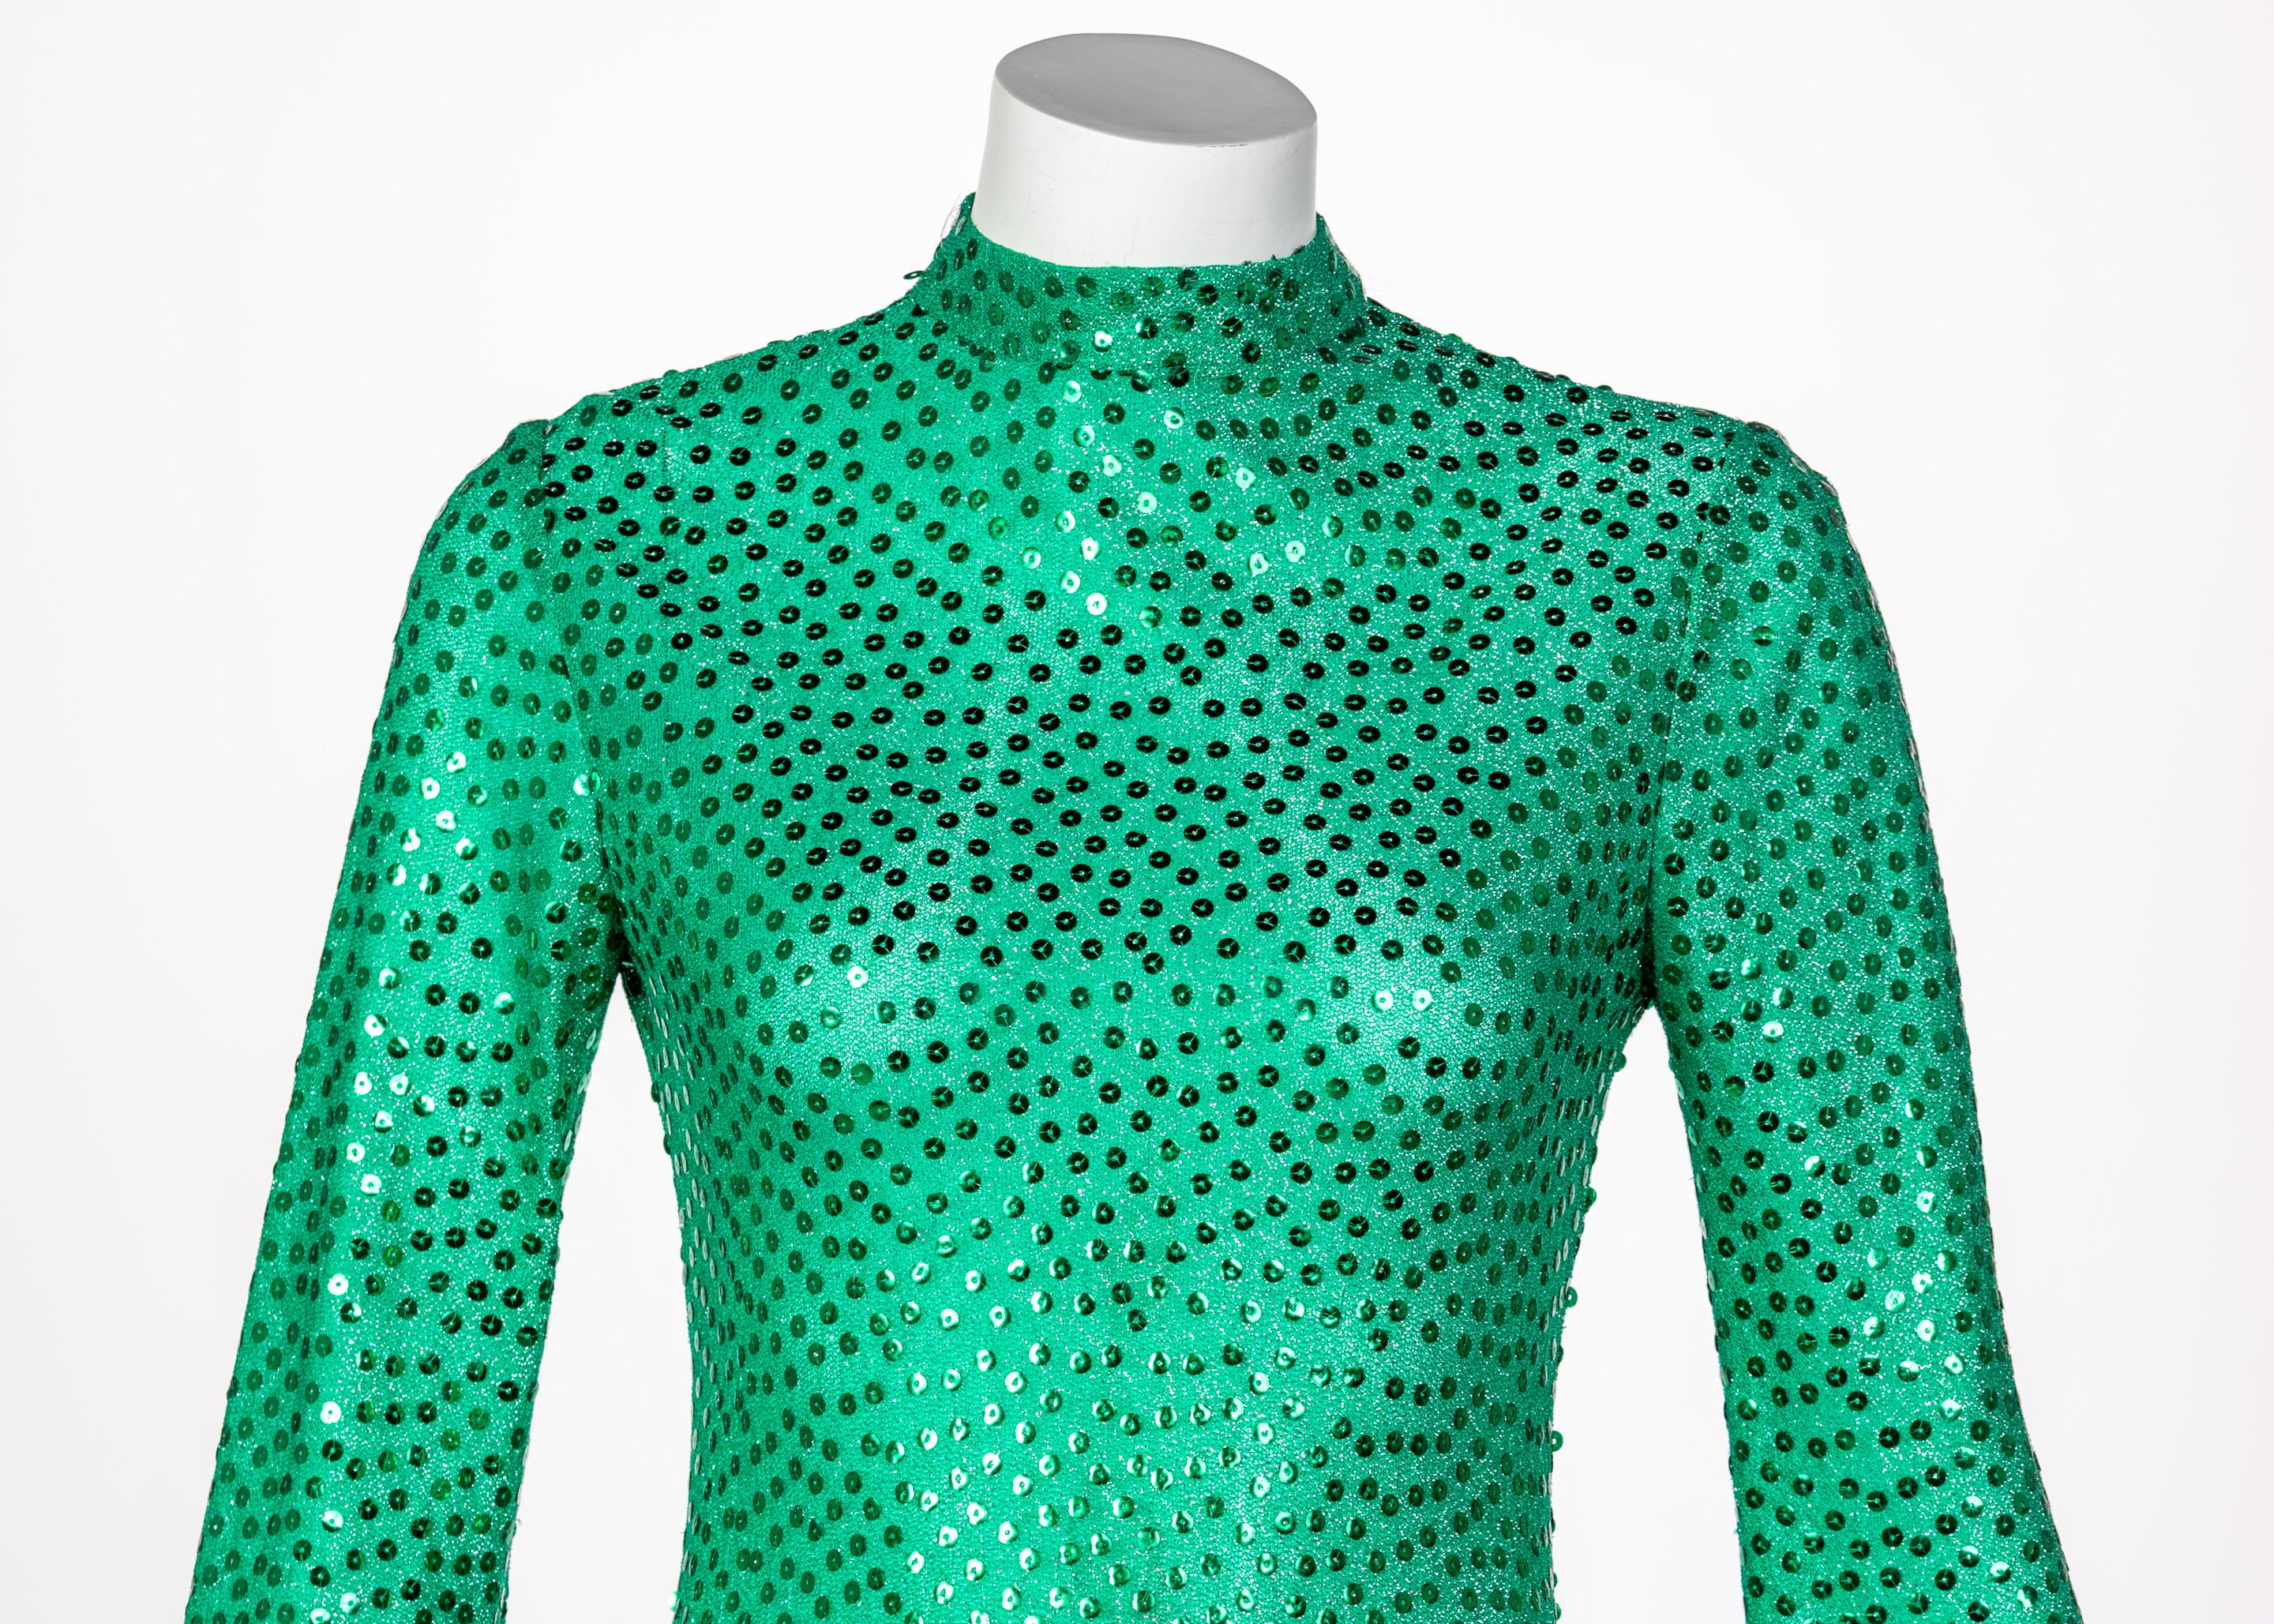 Mollie Parnis Emerald Green Mock Neck Sequin Dress, 1960s In Excellent Condition For Sale In Boca Raton, FL